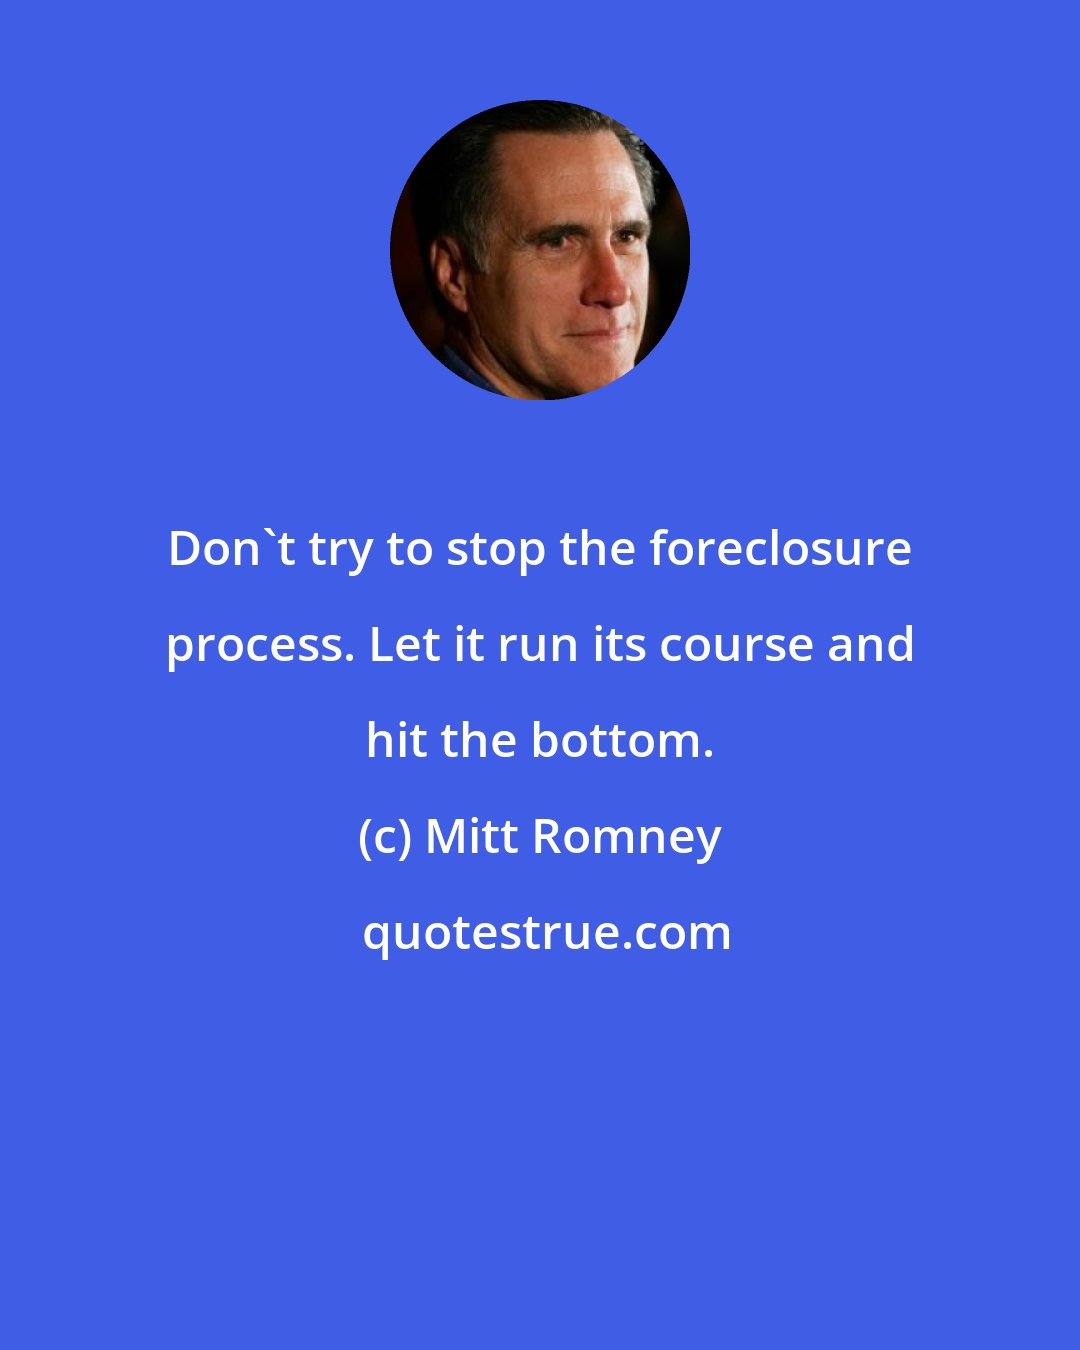 Mitt Romney: Don't try to stop the foreclosure process. Let it run its course and hit the bottom.